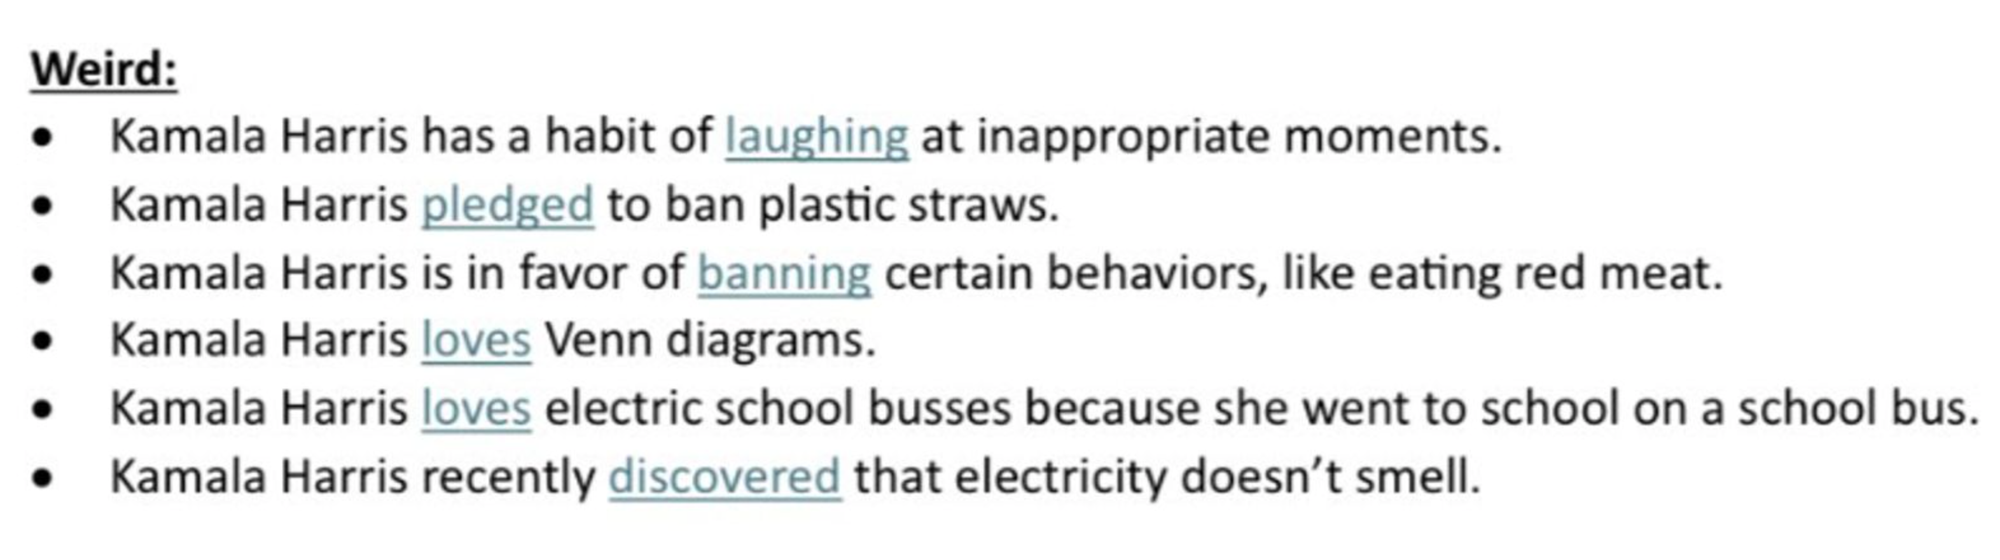 Images from an actual NRSC talking points document about Kamala Harris. Under the category Weird: KH has a habit of laughing at inappropriate moments. KH pledged to ban plastic straws. KH is in favor of banning certain behaviors like eating red meat. KH loves Venn diagrams. KH loves electric school busses because she went to school on a school bus. KH recently discovered that electricity doesn't smell